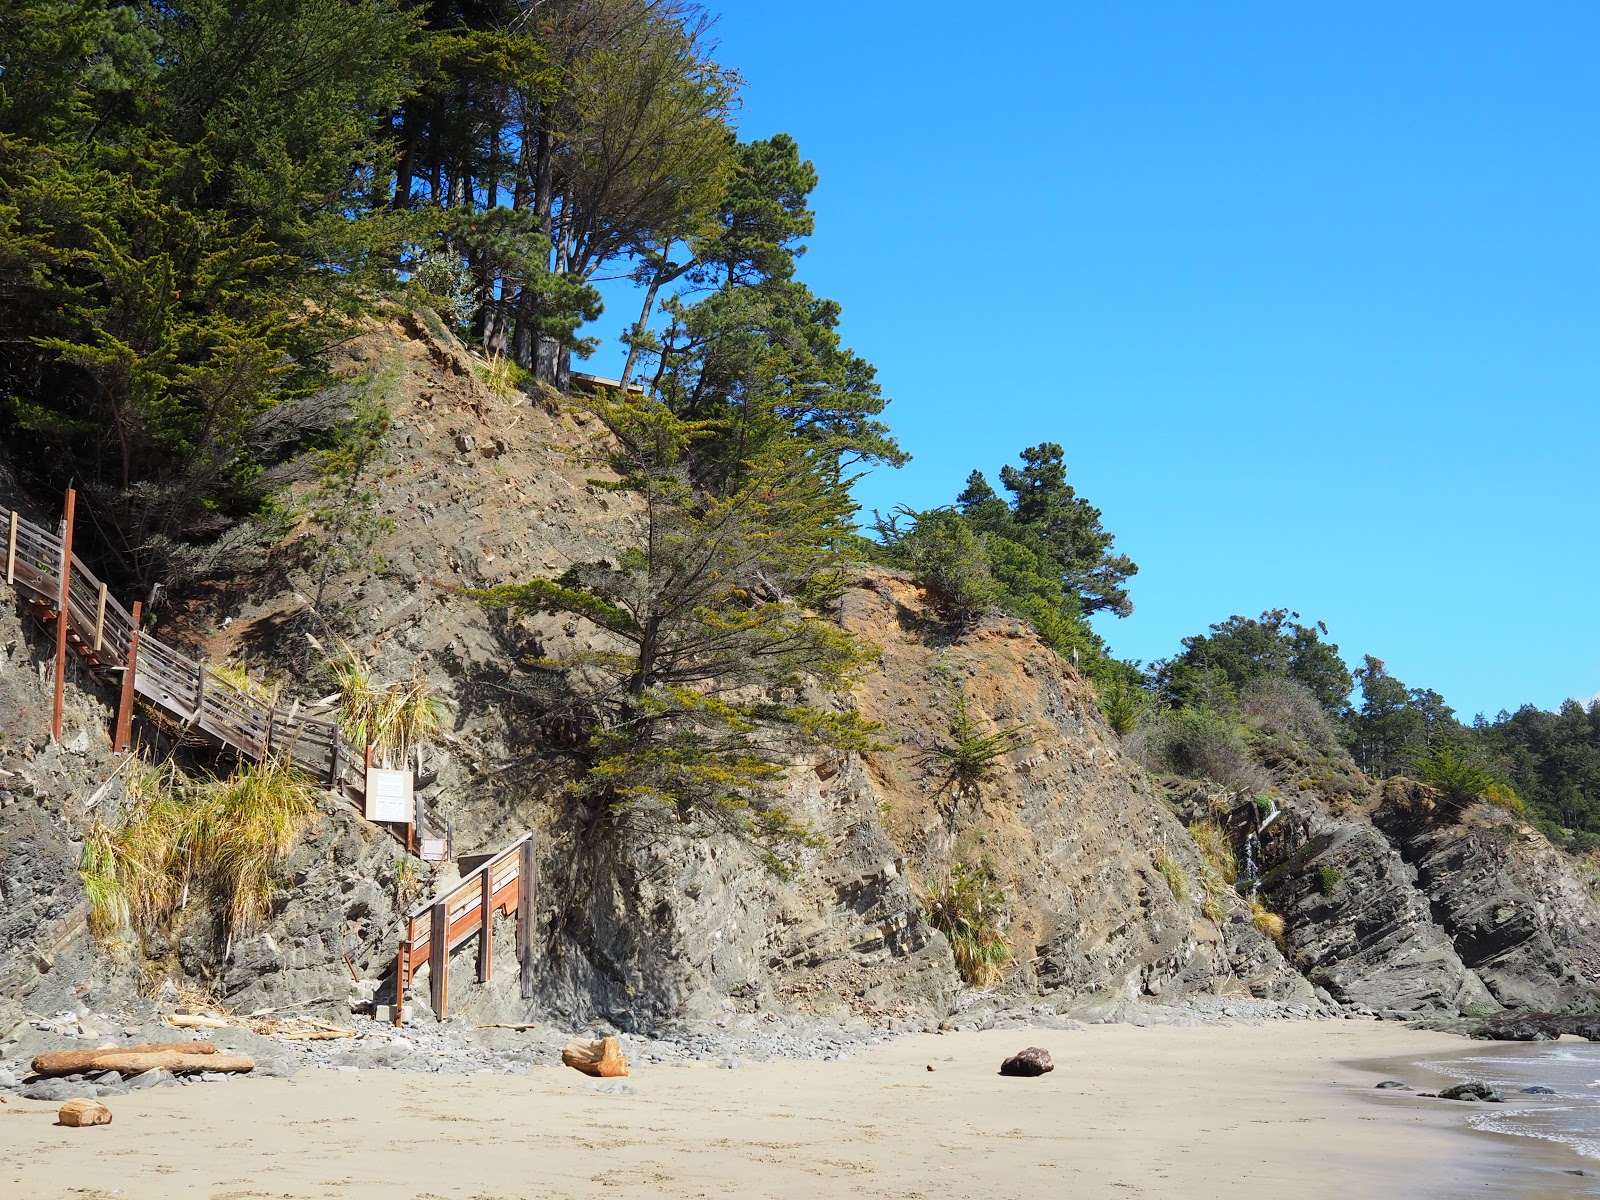 Photo of Fish Rock Beach and the settlement